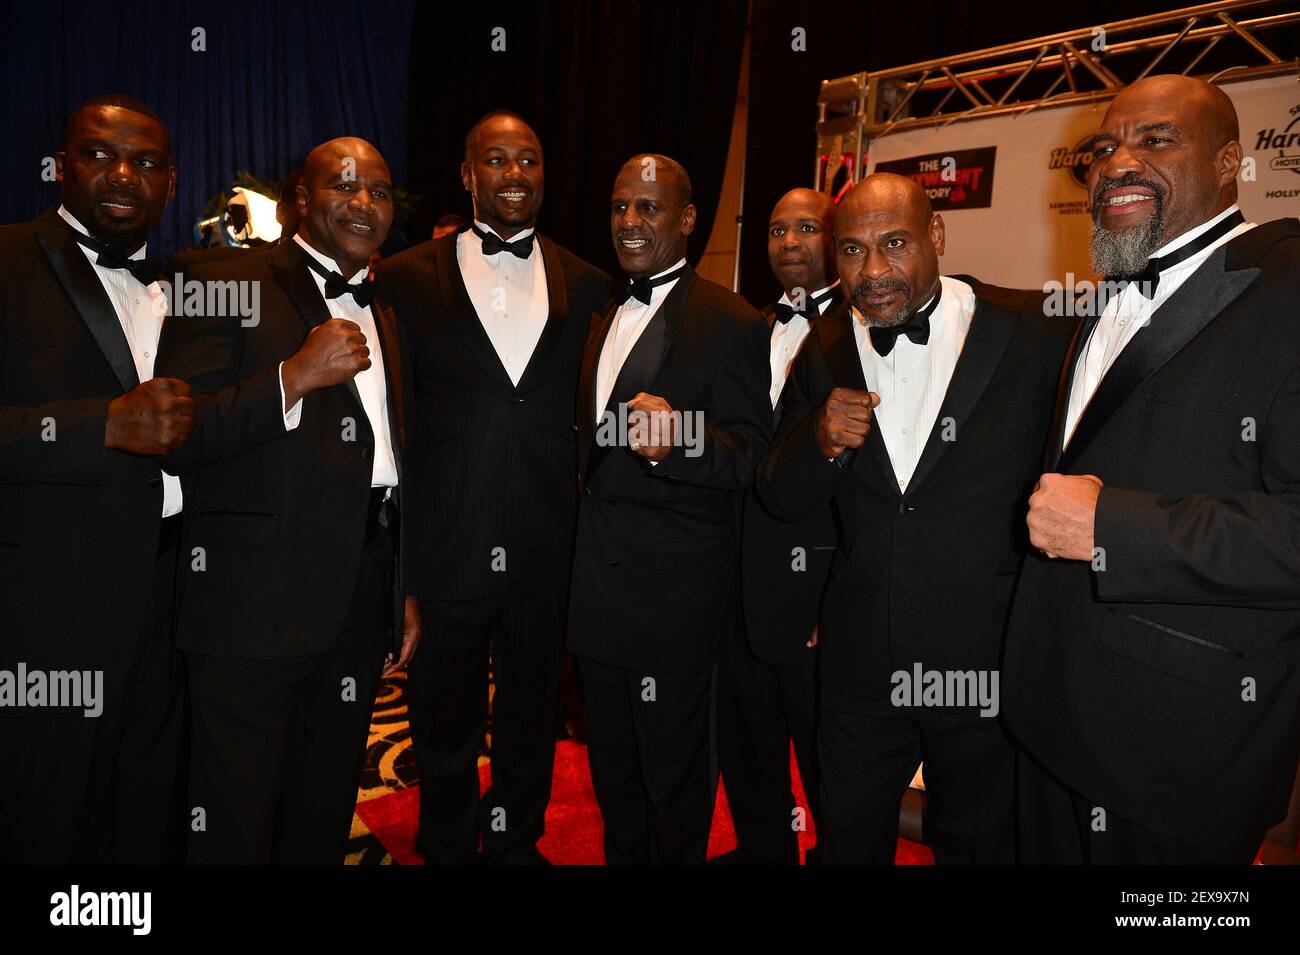 Hasim Rahman, Tony Tubbs, Evander Holyfield, Lennox Lewis, Chris Byrd,  Oliver McCall and Shannon Briggs attends Boxing World Heavyweight Champions  Media Day with 20 former world heavyweight boxing champions at The Seminole